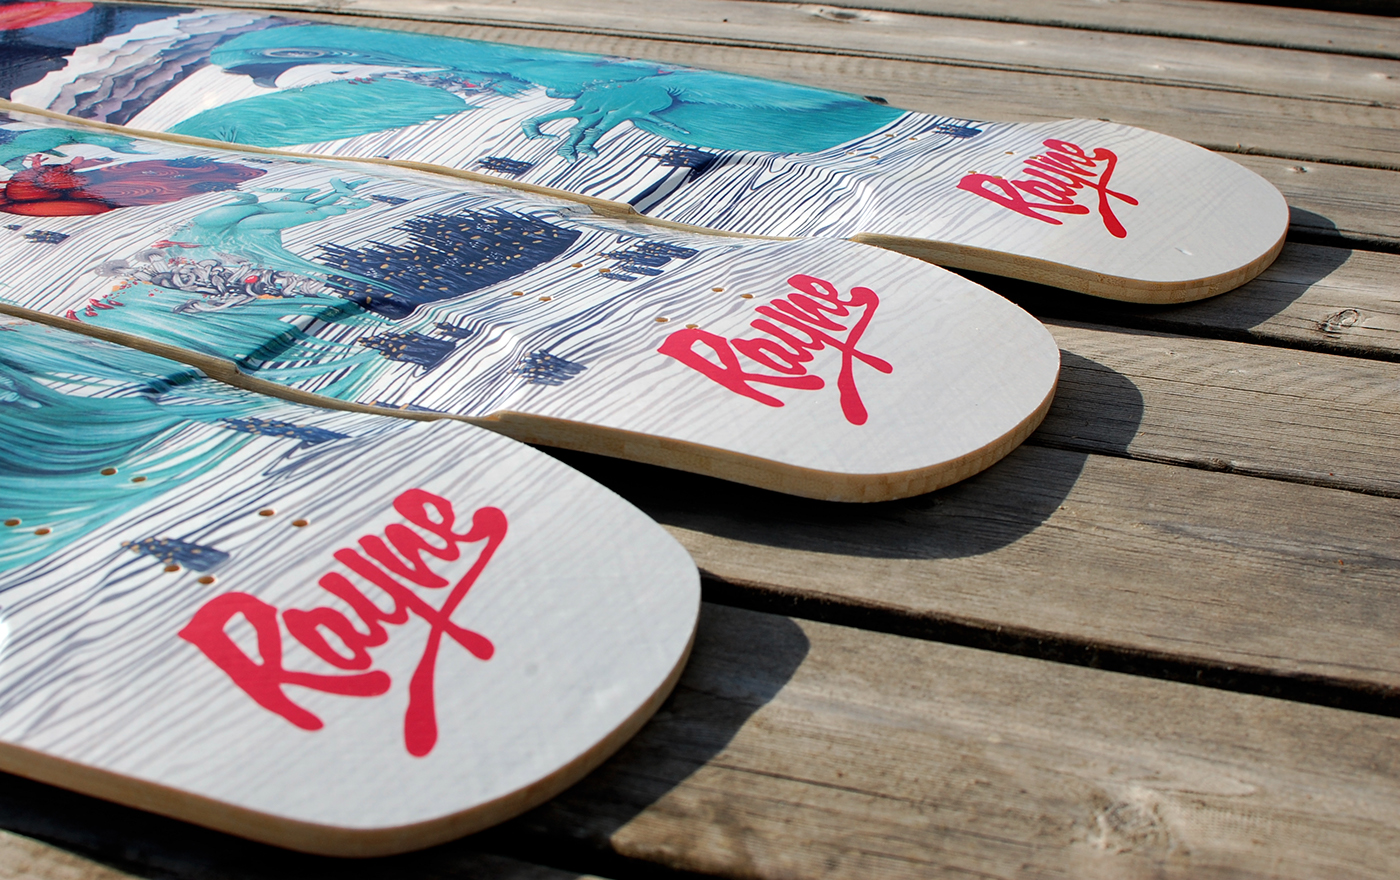 Rayne LONGBOARD rayne longboard longboard artwork longboard graphic skate art turquoise and red blood moon